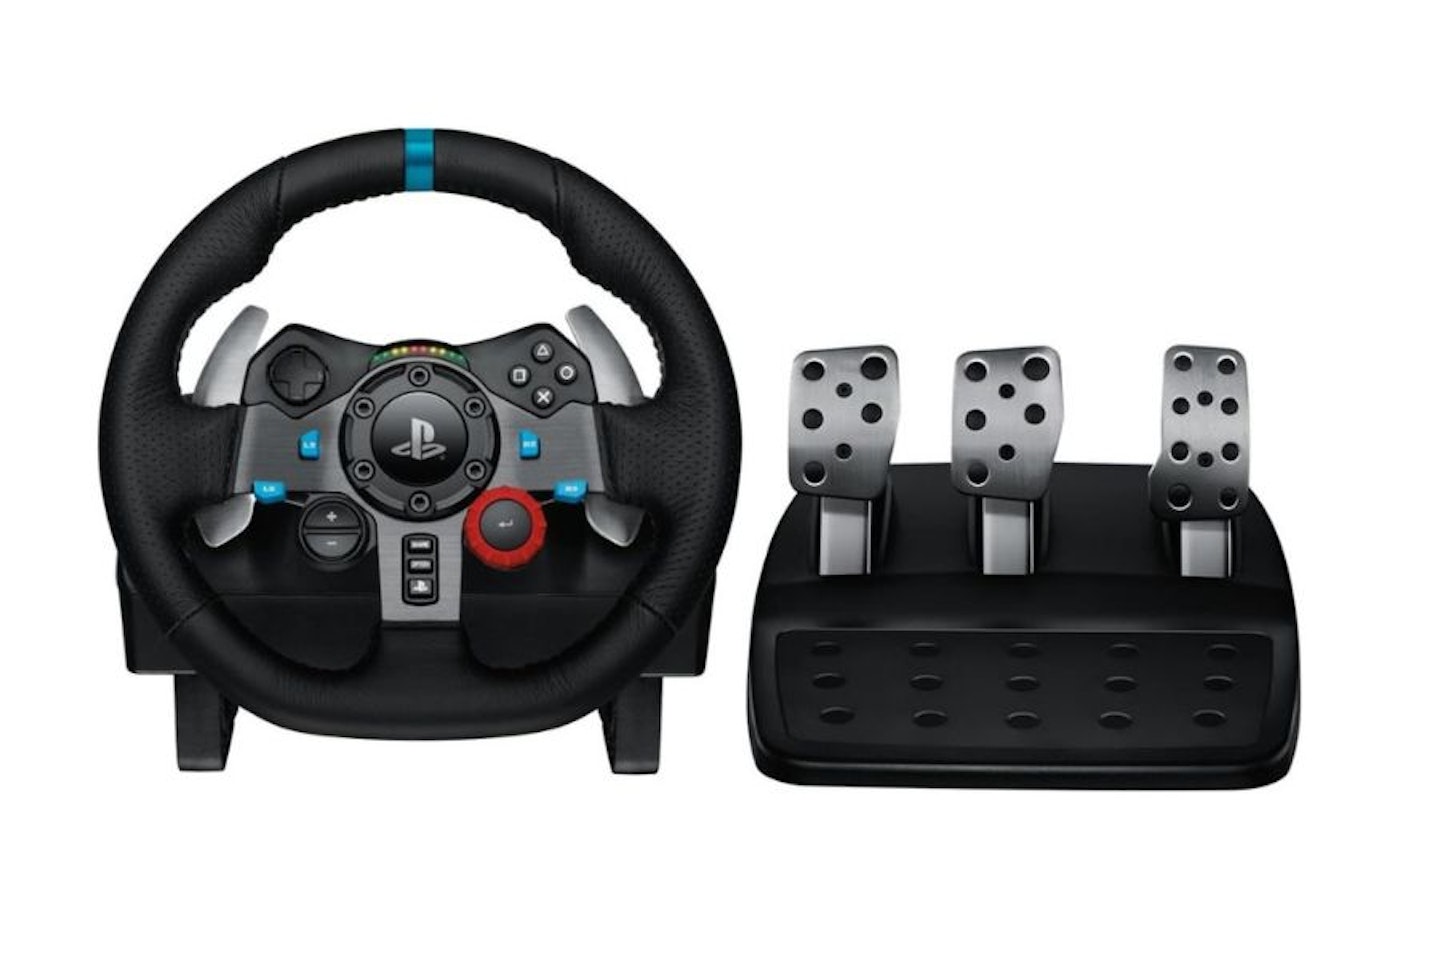 The Best Racing Wheels For Driving Games